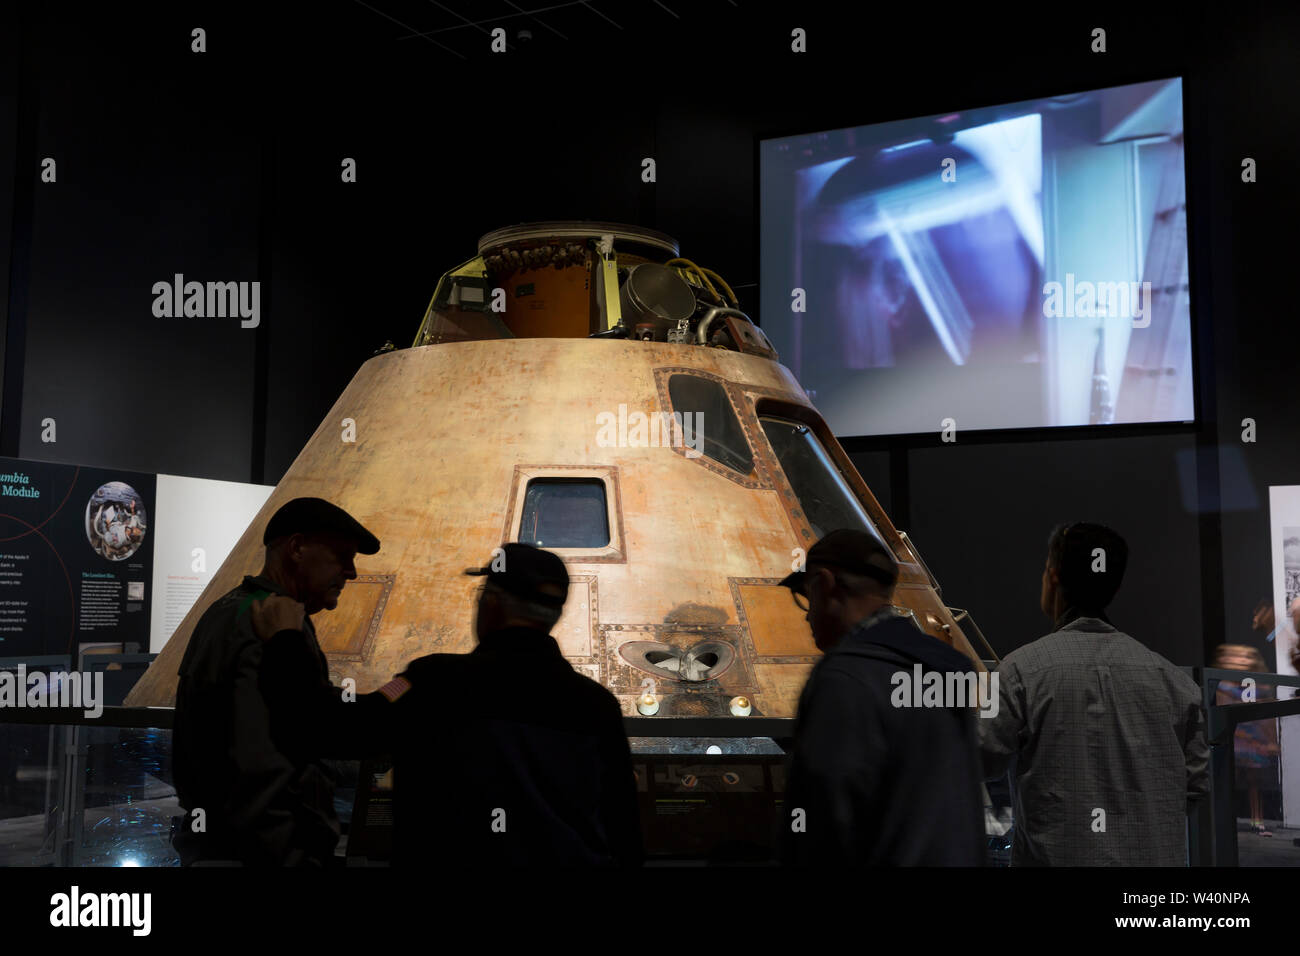 The Command Module Columbia on display during the 'Destination Moon' exhibit at The Museum of Flight in Seattle, Washington on July 18, 2019. The exhibition, presented in partnership with the Smithsonian Institution, celebrates the Apollo 11 Mission during the 50th anniversary of the landmark moon landing. Stock Photo